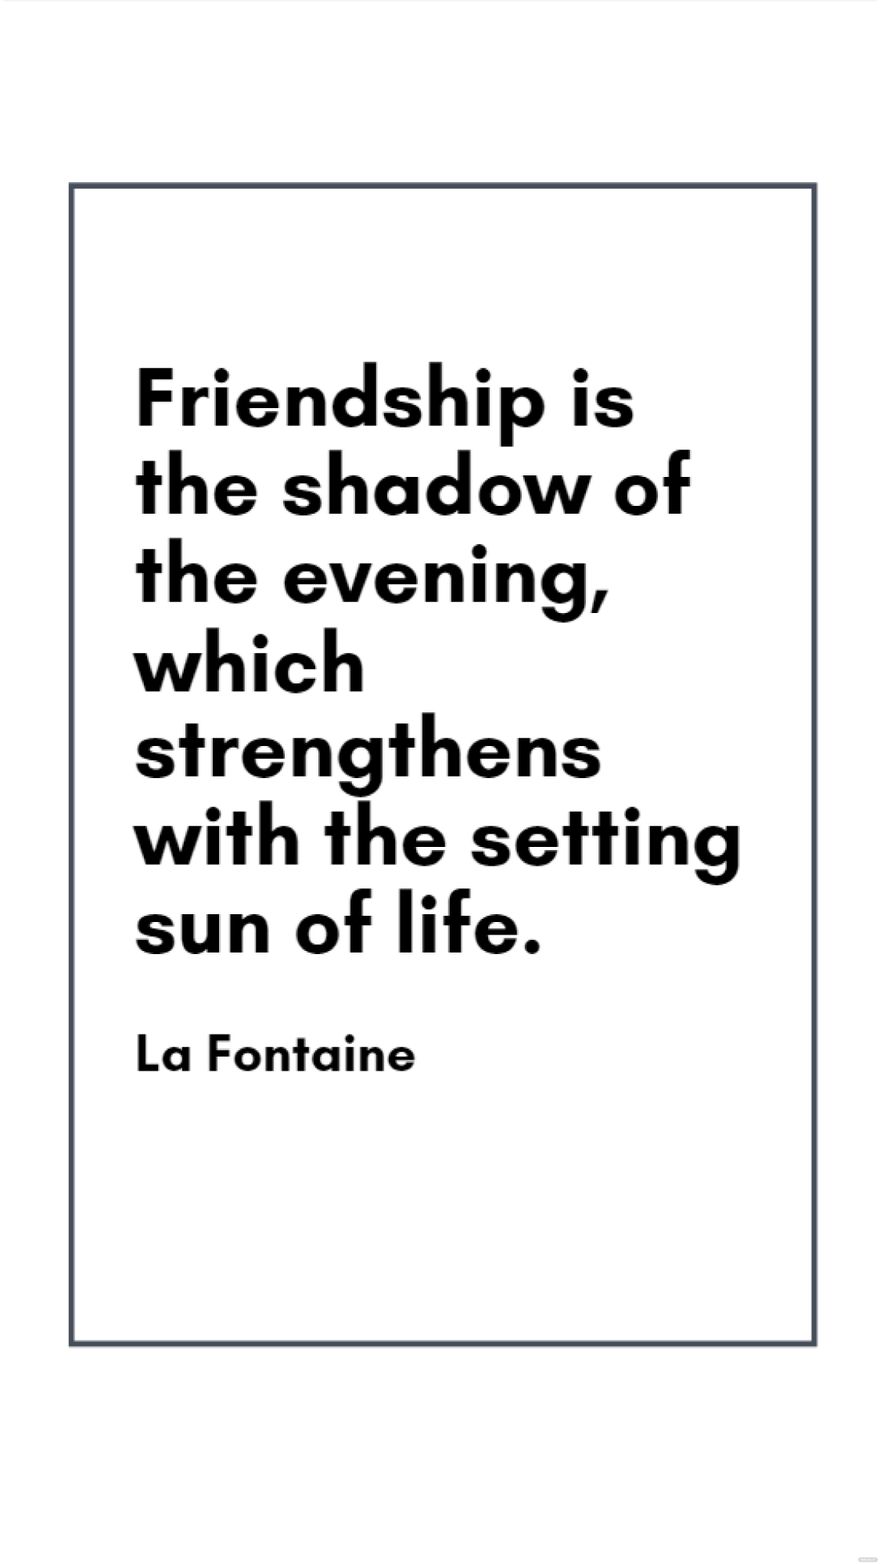 Free La Fontaine - Friendship is the shadow of the evening, which strengthens with the setting sun of life. in JPG